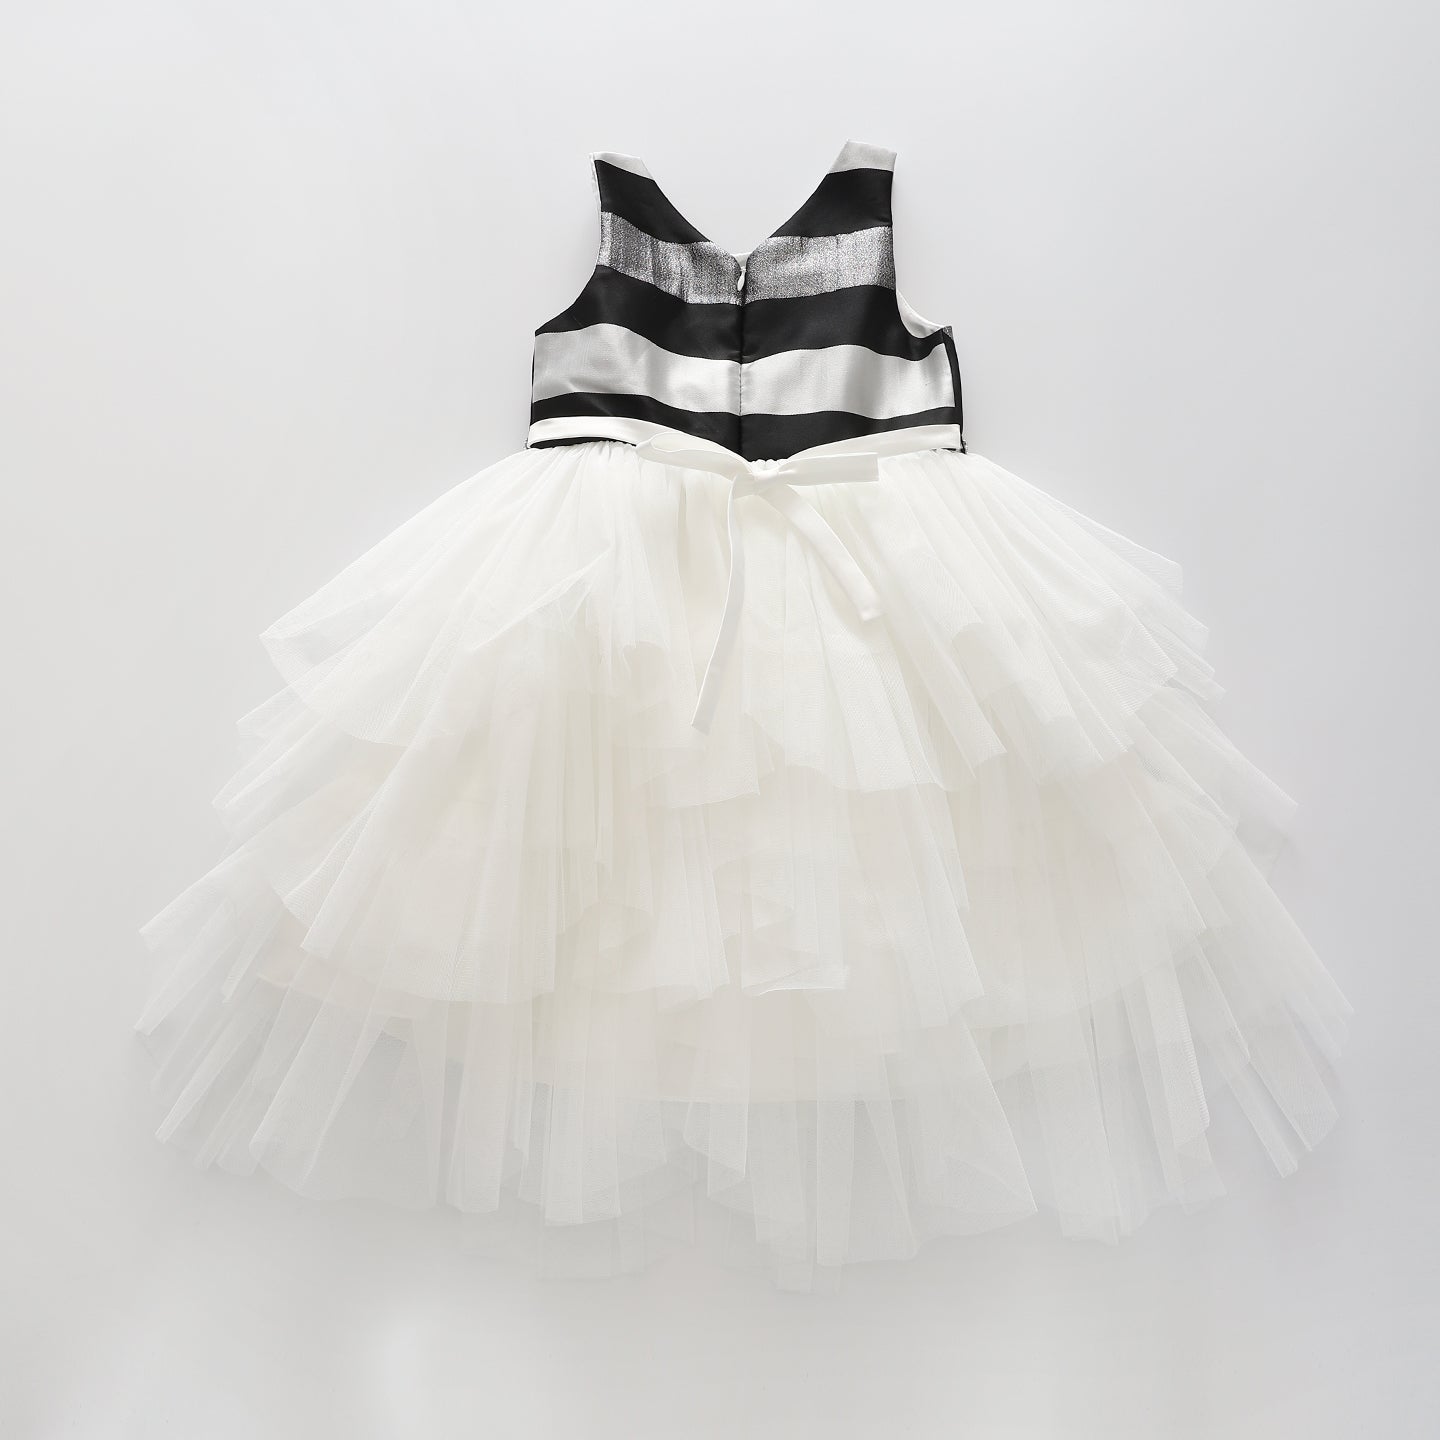 Girls' Black and Silver Party Dress